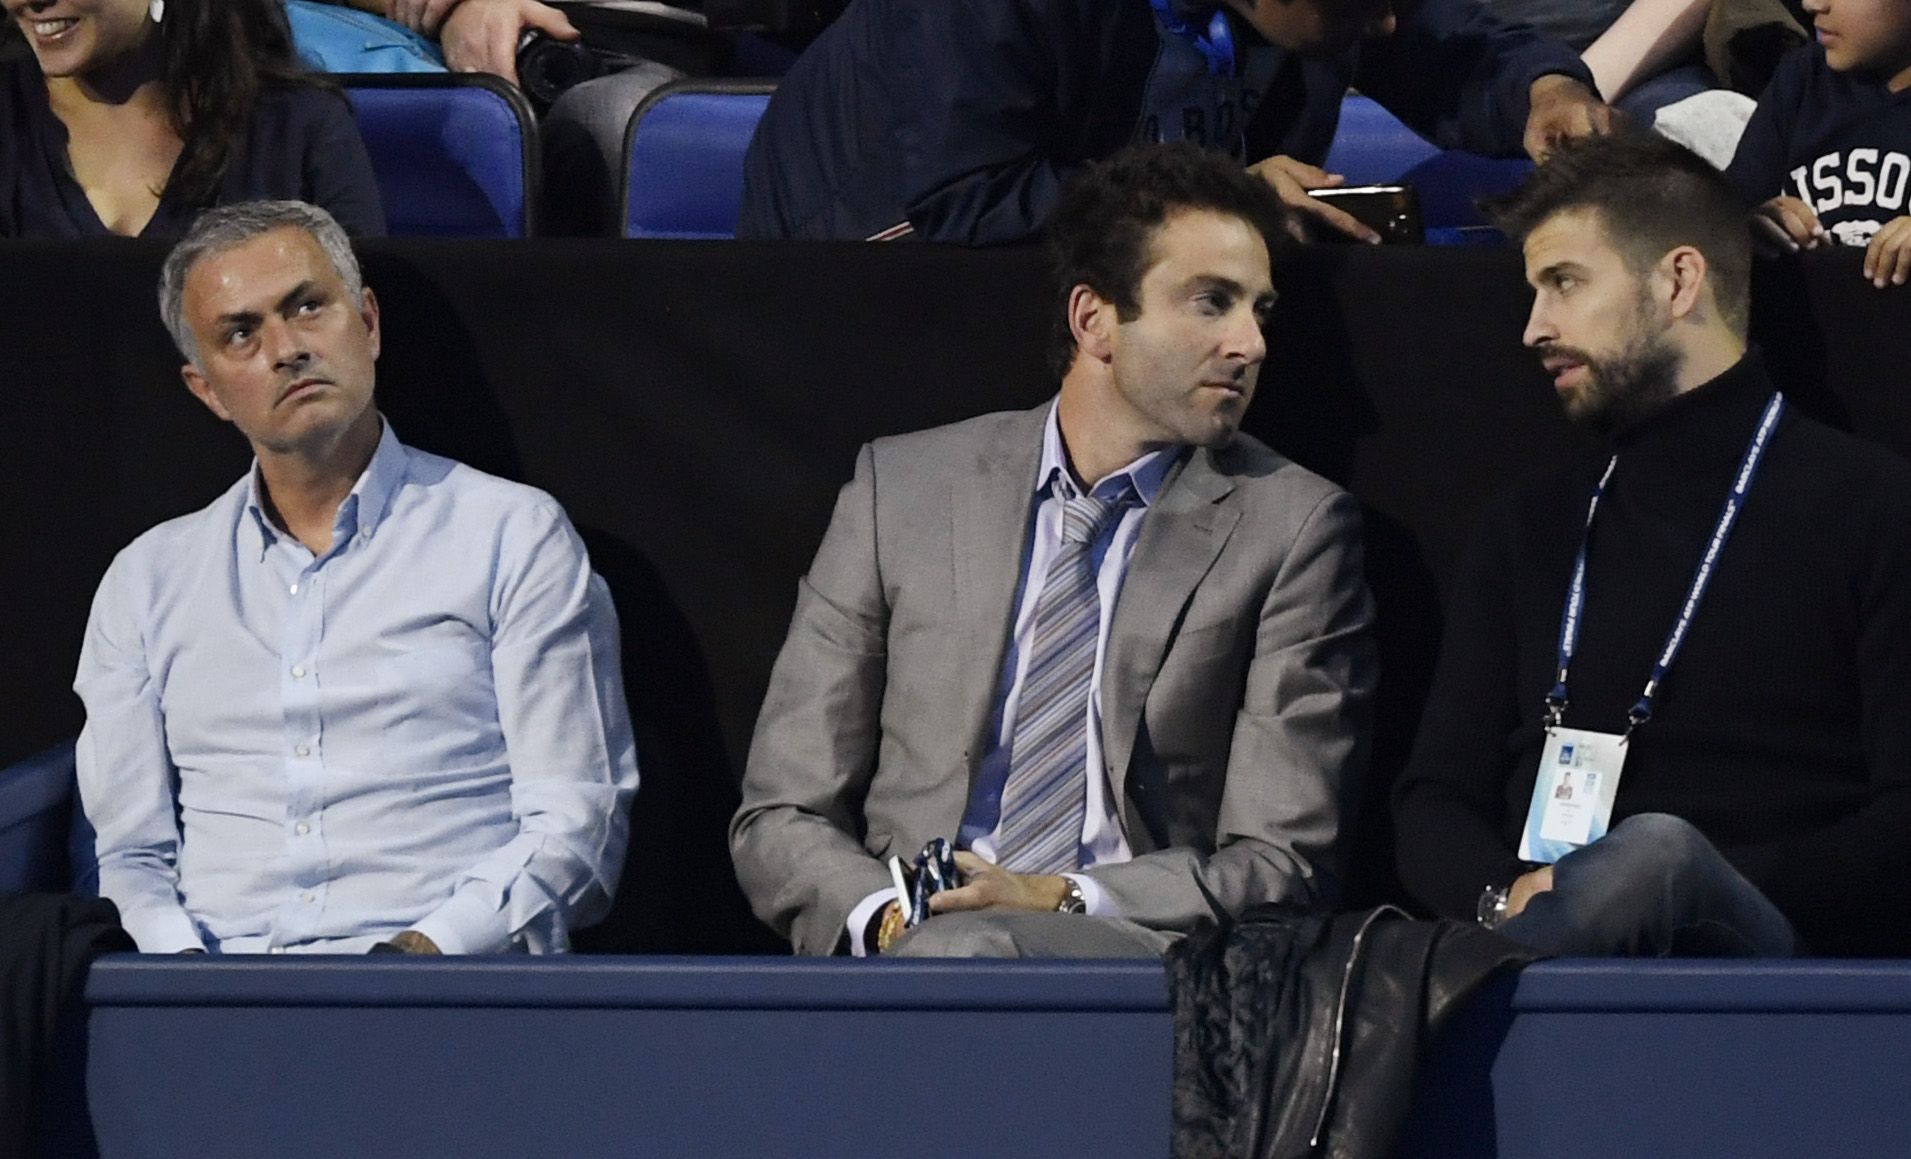 Manchester United manager Jose Mourinho and Barcelona and Spain's Gerard Pique in the stands during the round robin match between Serbia's Novak Djokovic and Austria's Dominic Thiem